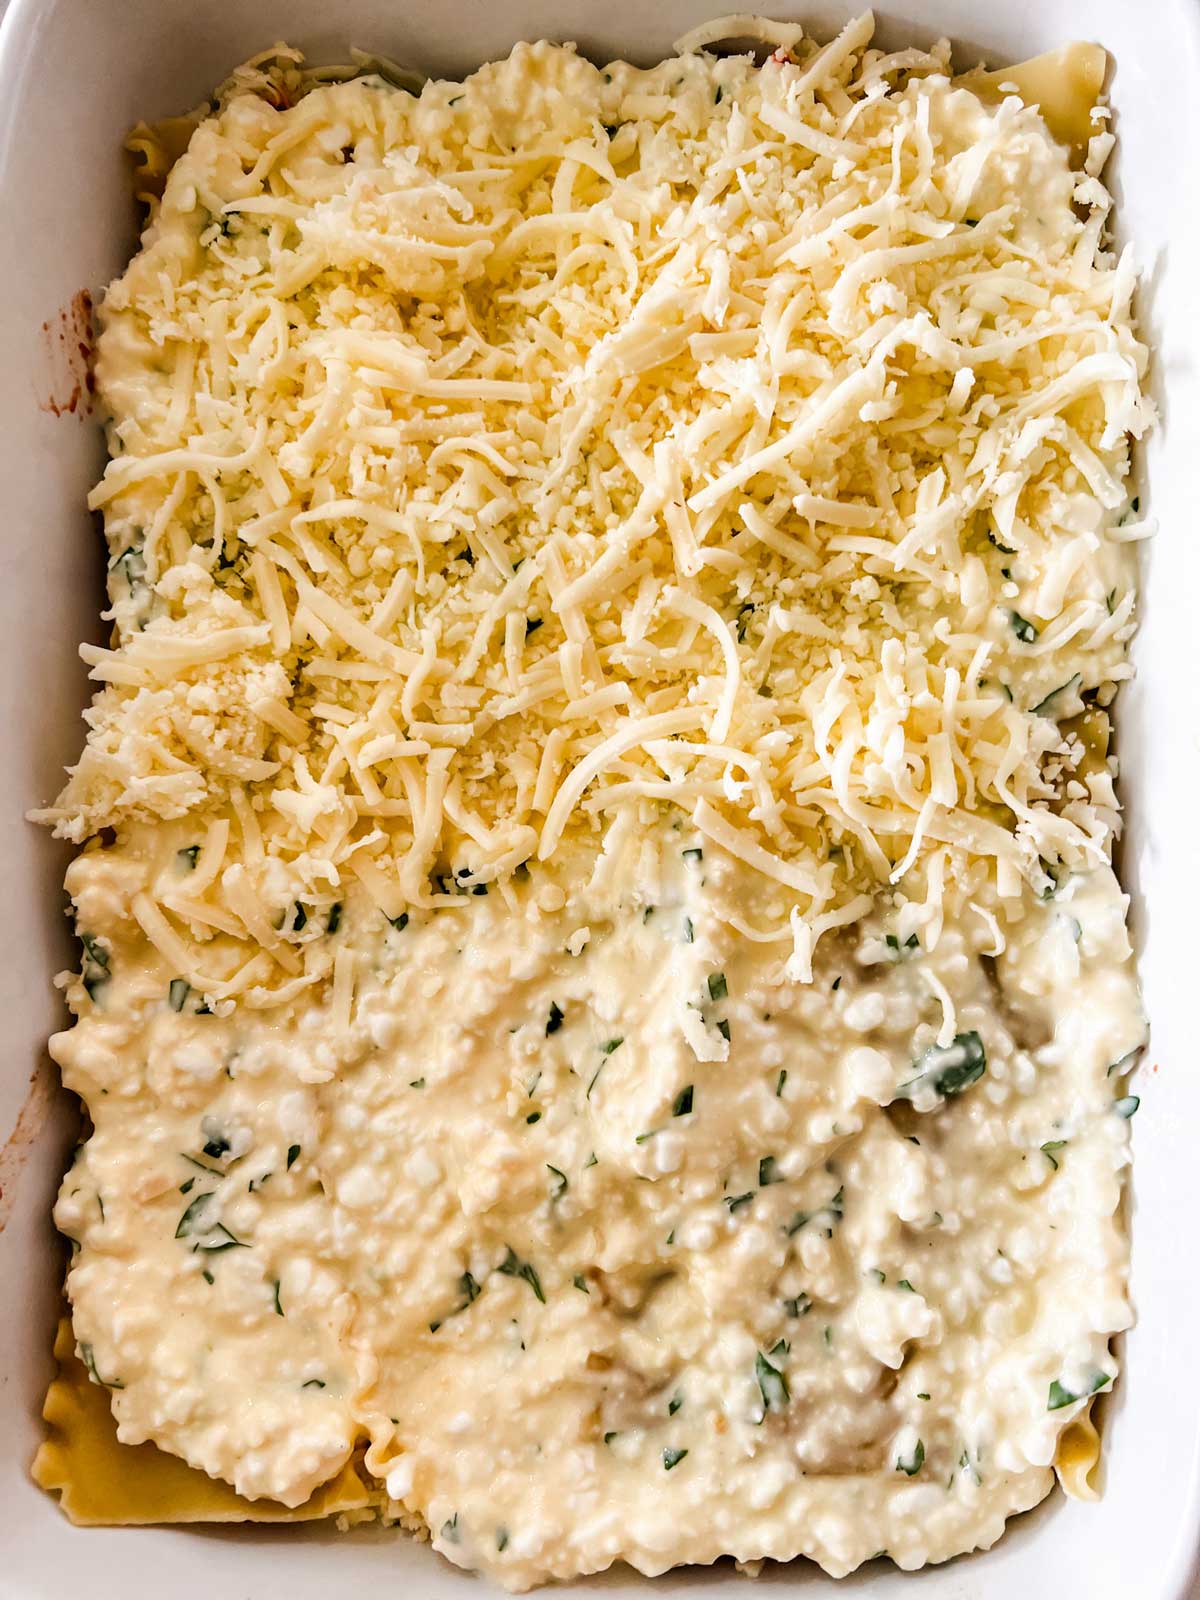 Layered lasagna that has had a full cottage cheese layer and is having cheese sprinkled on top.